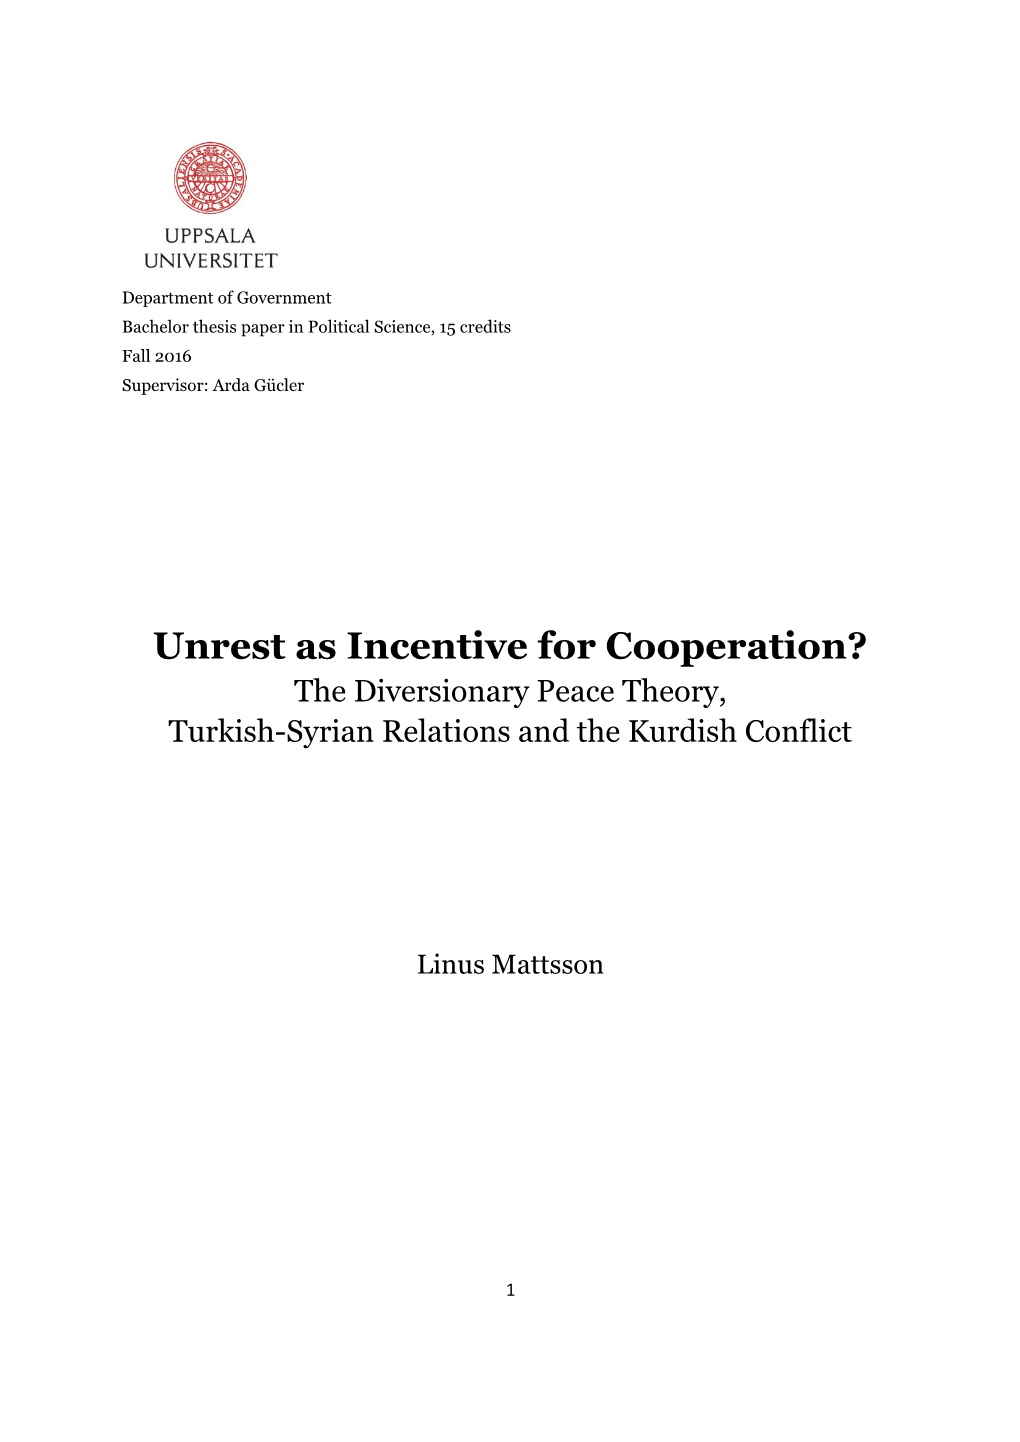 Unrest As Incentive for Cooperation? the Diversionary Peace Theory, Turkish-Syrian Relations and the Kurdish Conflict